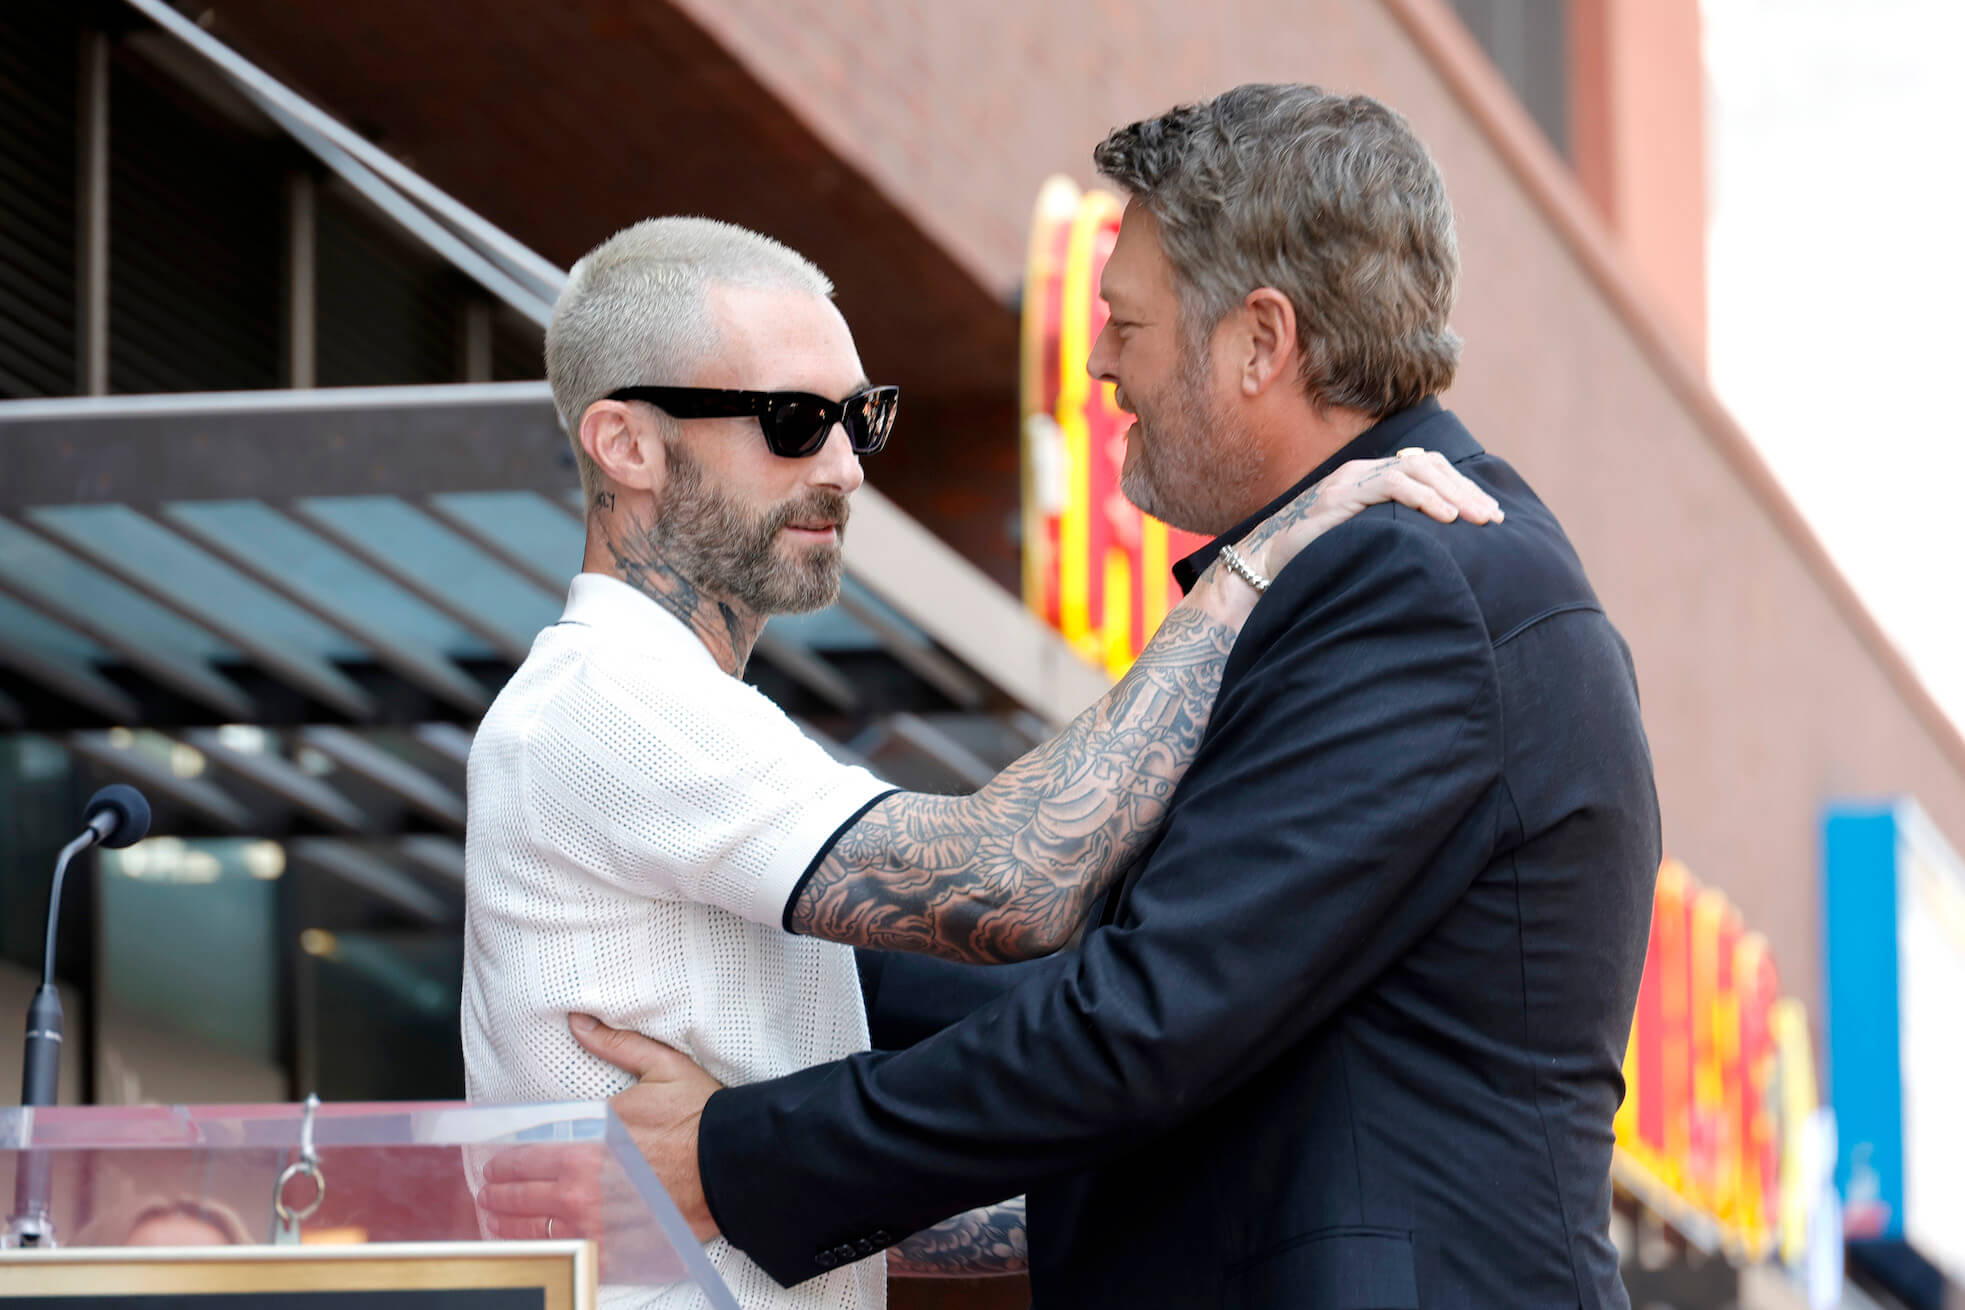 Blake Shelton and Adam Levine hugging at the Hollywood Walk of Fame